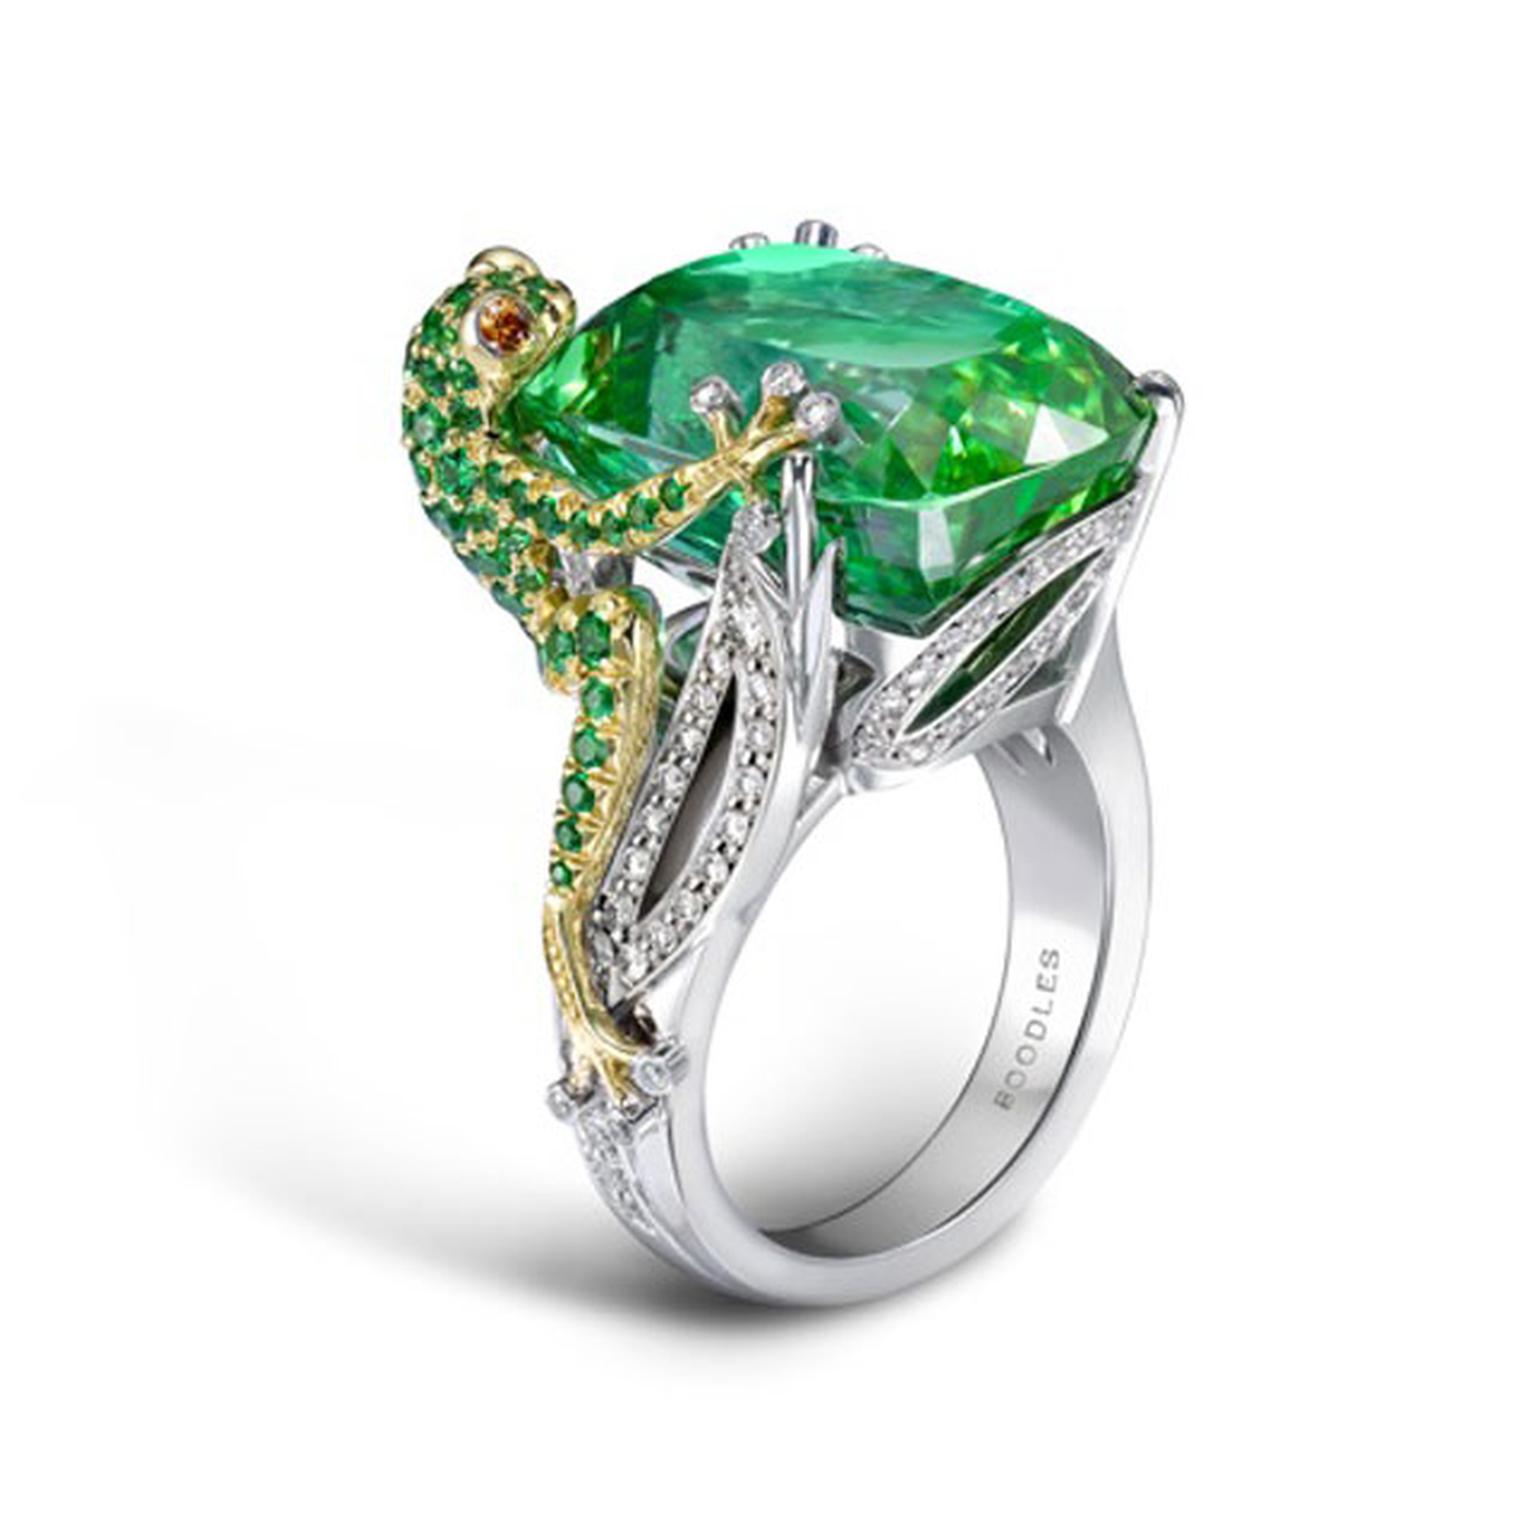 BOODLES,-Green-Frog.-A-green-tourmaline-frog-design-ring-in-platinum-and-18ct-yellow-gold.-The-centre-stone-is-over-20cts.-His-little-body-is-made-up-of-tourmaline-stones. £36,200